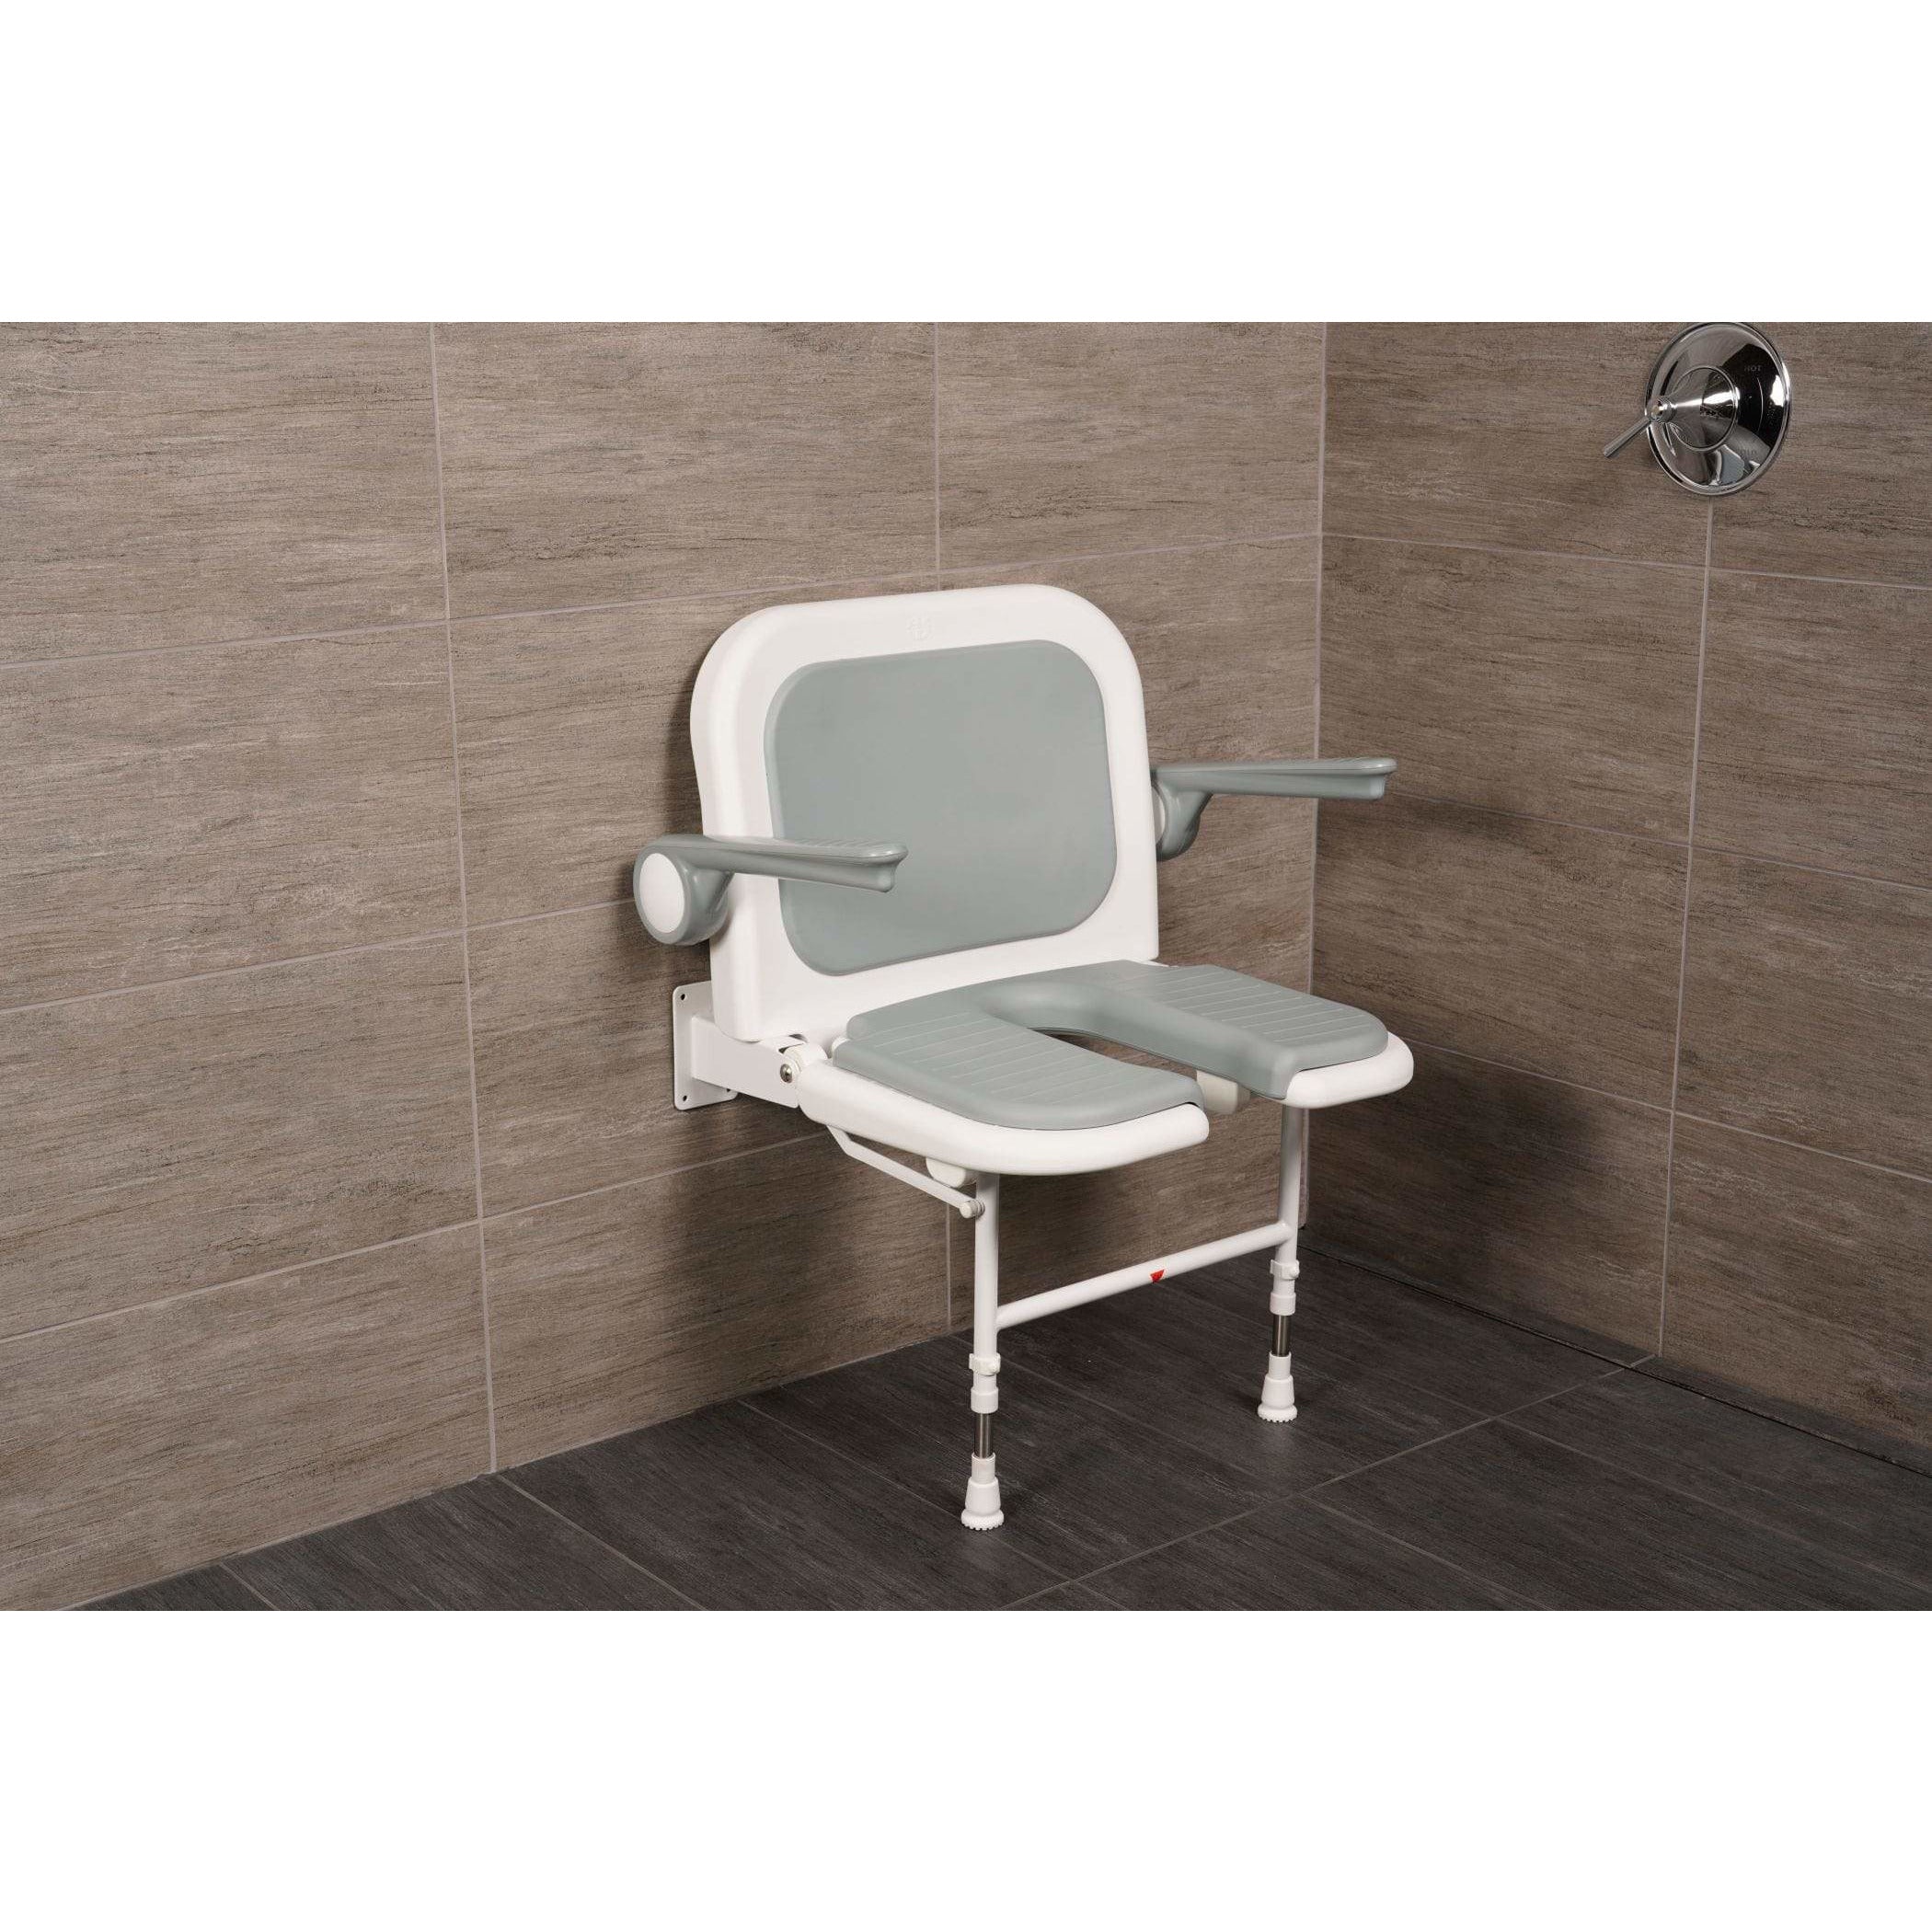 Arc First 4000 Series 23¾" Wide Folding Shower Seat with Arms, Back, Gray Pads & "U" Shaped 04250P